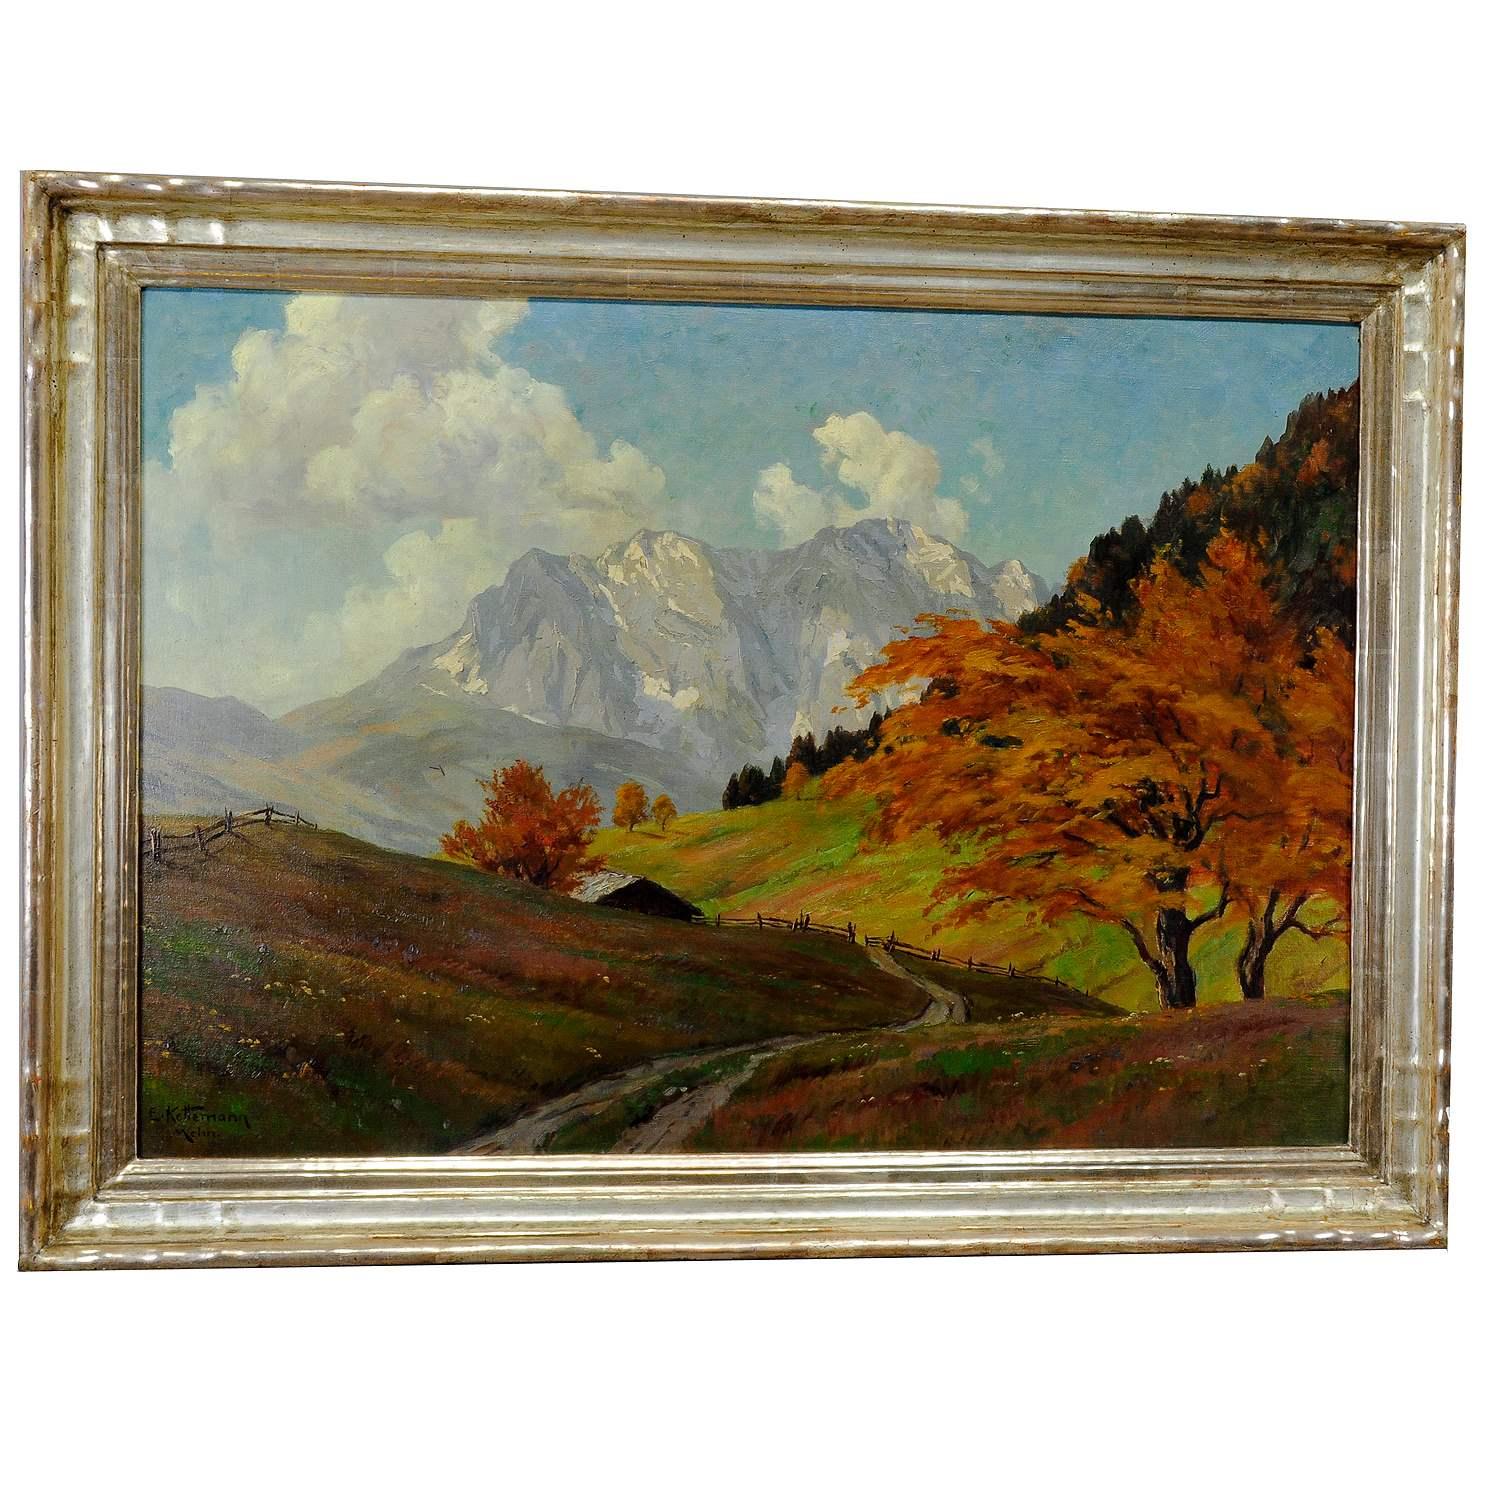 Erwin Kettemann Landscape in the Tyrolean Alps, Oil on Canvas ca. 1930

An original antique painting showing alpine meadows with moutains in the background. Oil on canvas, painted and signed by Erwin Kettemann, Munich (1897–1971) ca. 1930.

Mid 20th